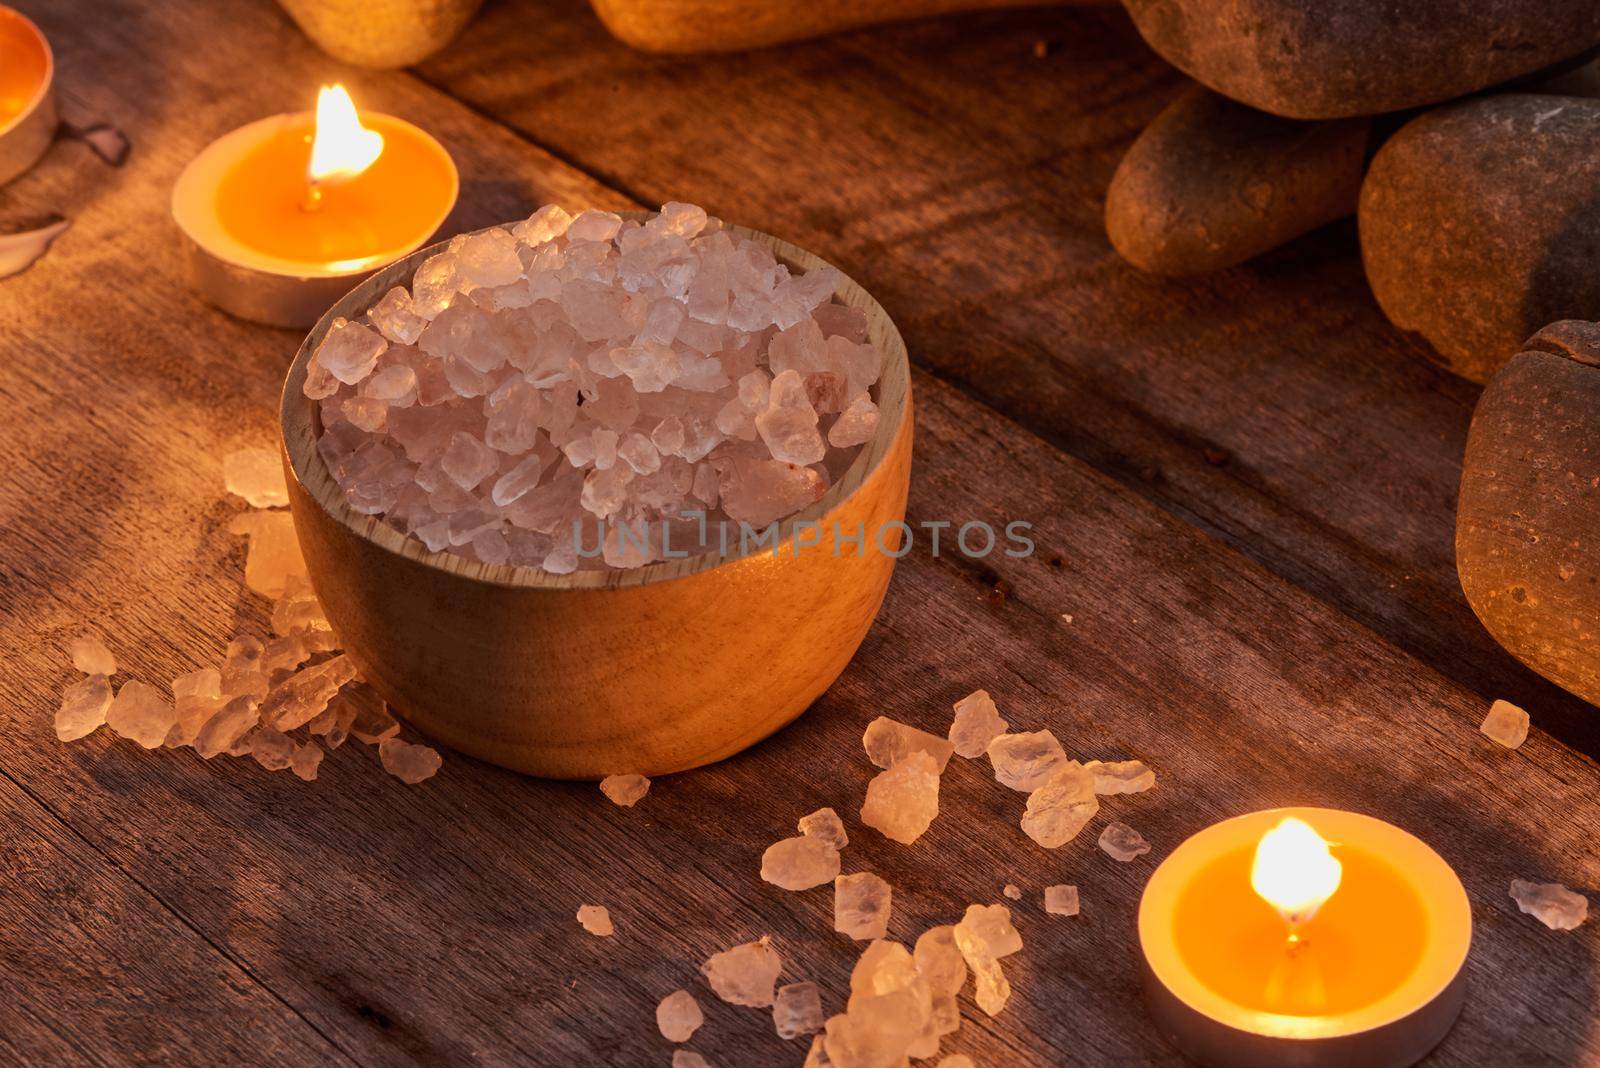  Spa setting and health care items on dark wooden background. Space for text